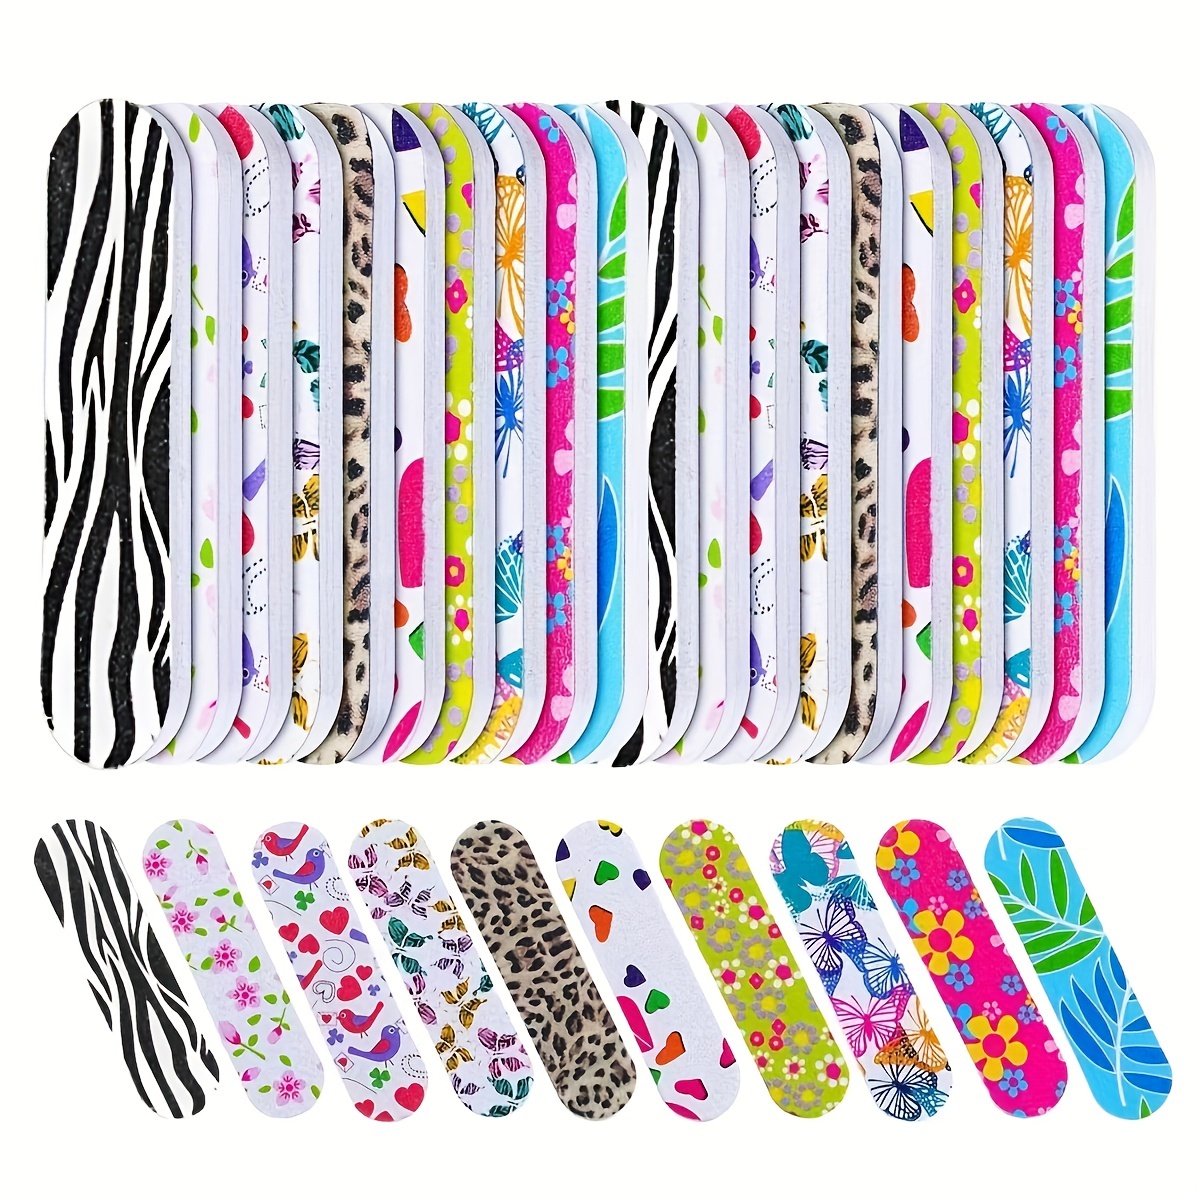 

100 Pieces Professional Double-sided Nail Files With Grit Print - Stylish Manicure And Pedicure Emery Board Tool